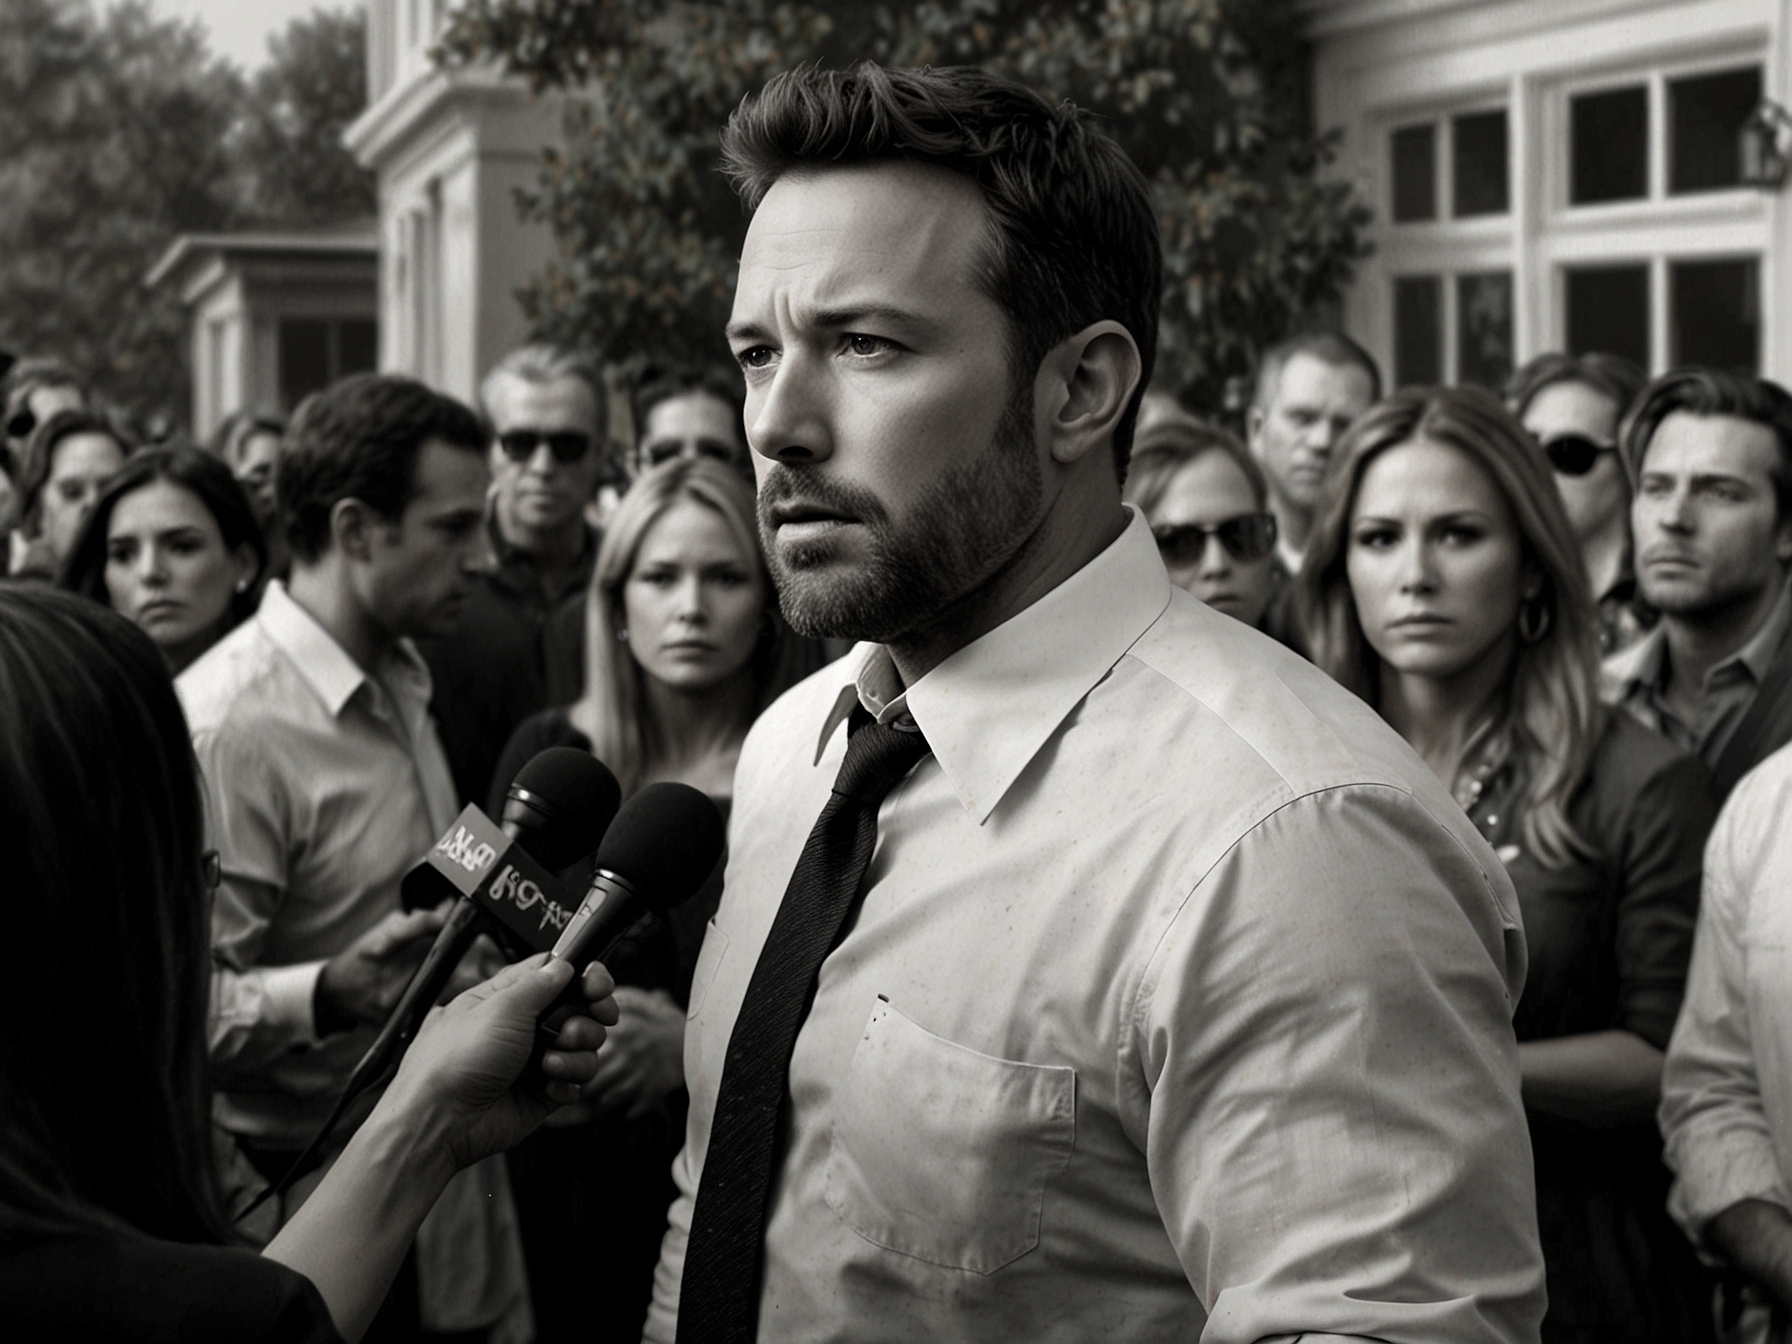 Ben Affleck confronts a crowd of persistent reporters outside Jennifer Lopez's home, visibly upset and frustrated as he navigates the intense media scrutiny.